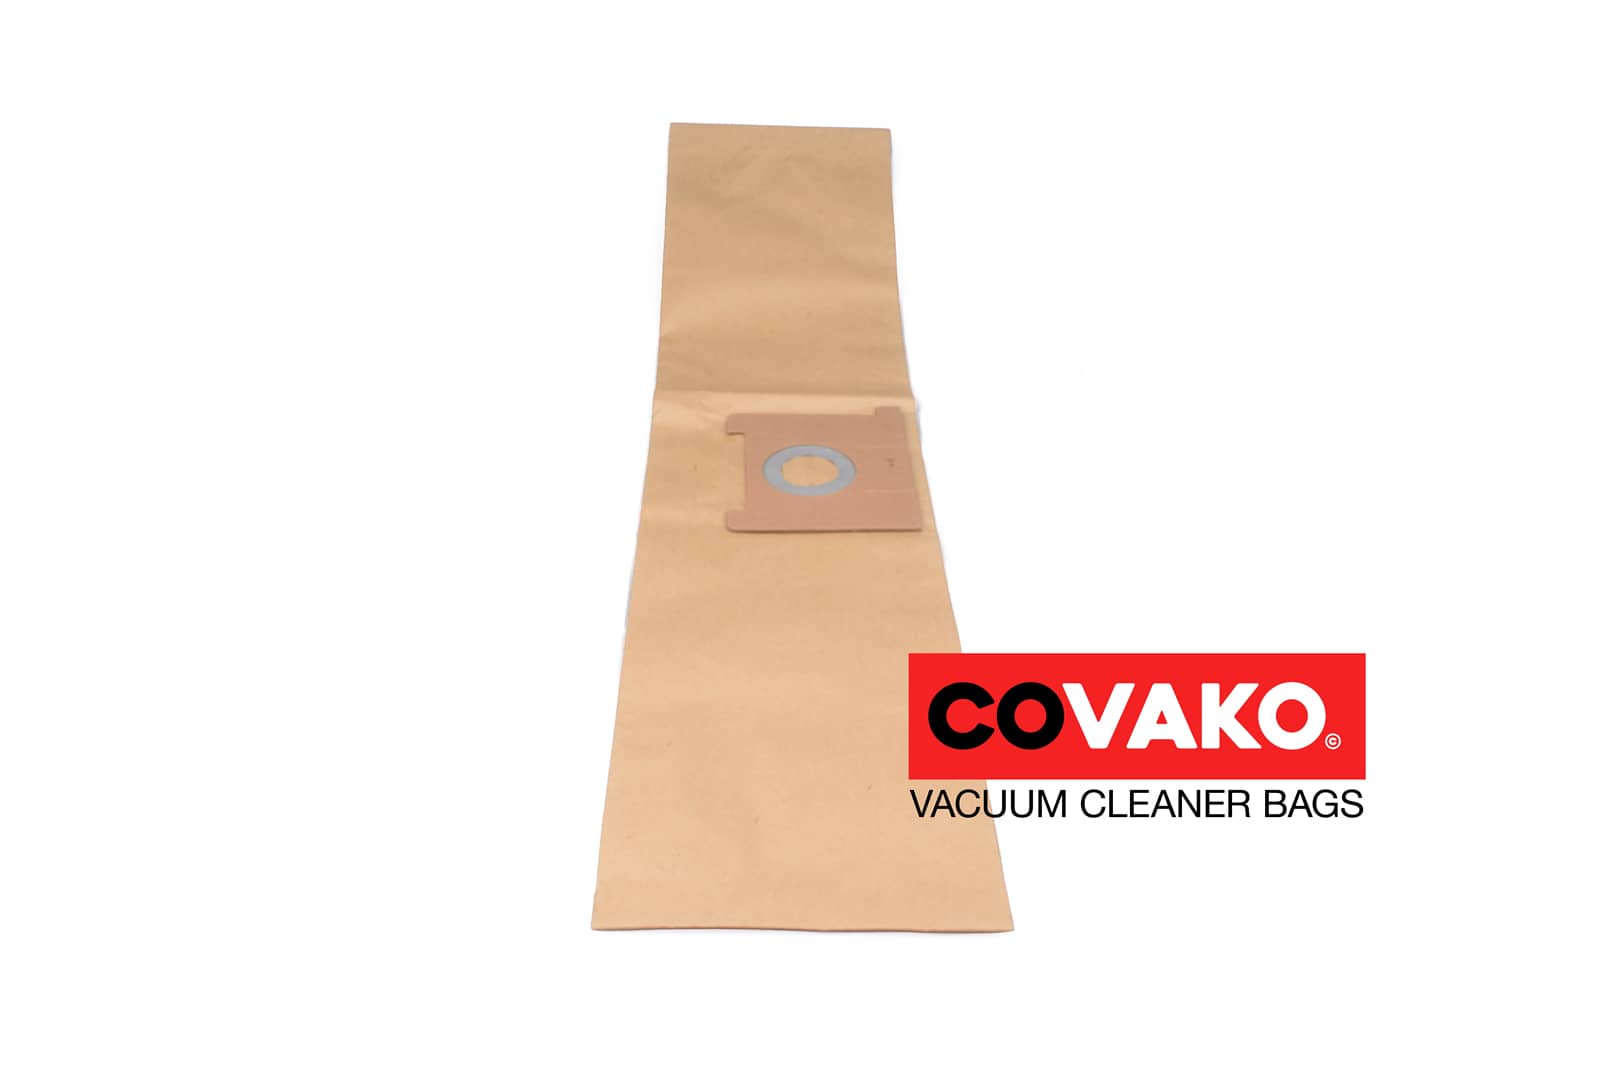 Oehme Otto K1022009480 / Paper - Oehme Otto vacuum cleaner bags